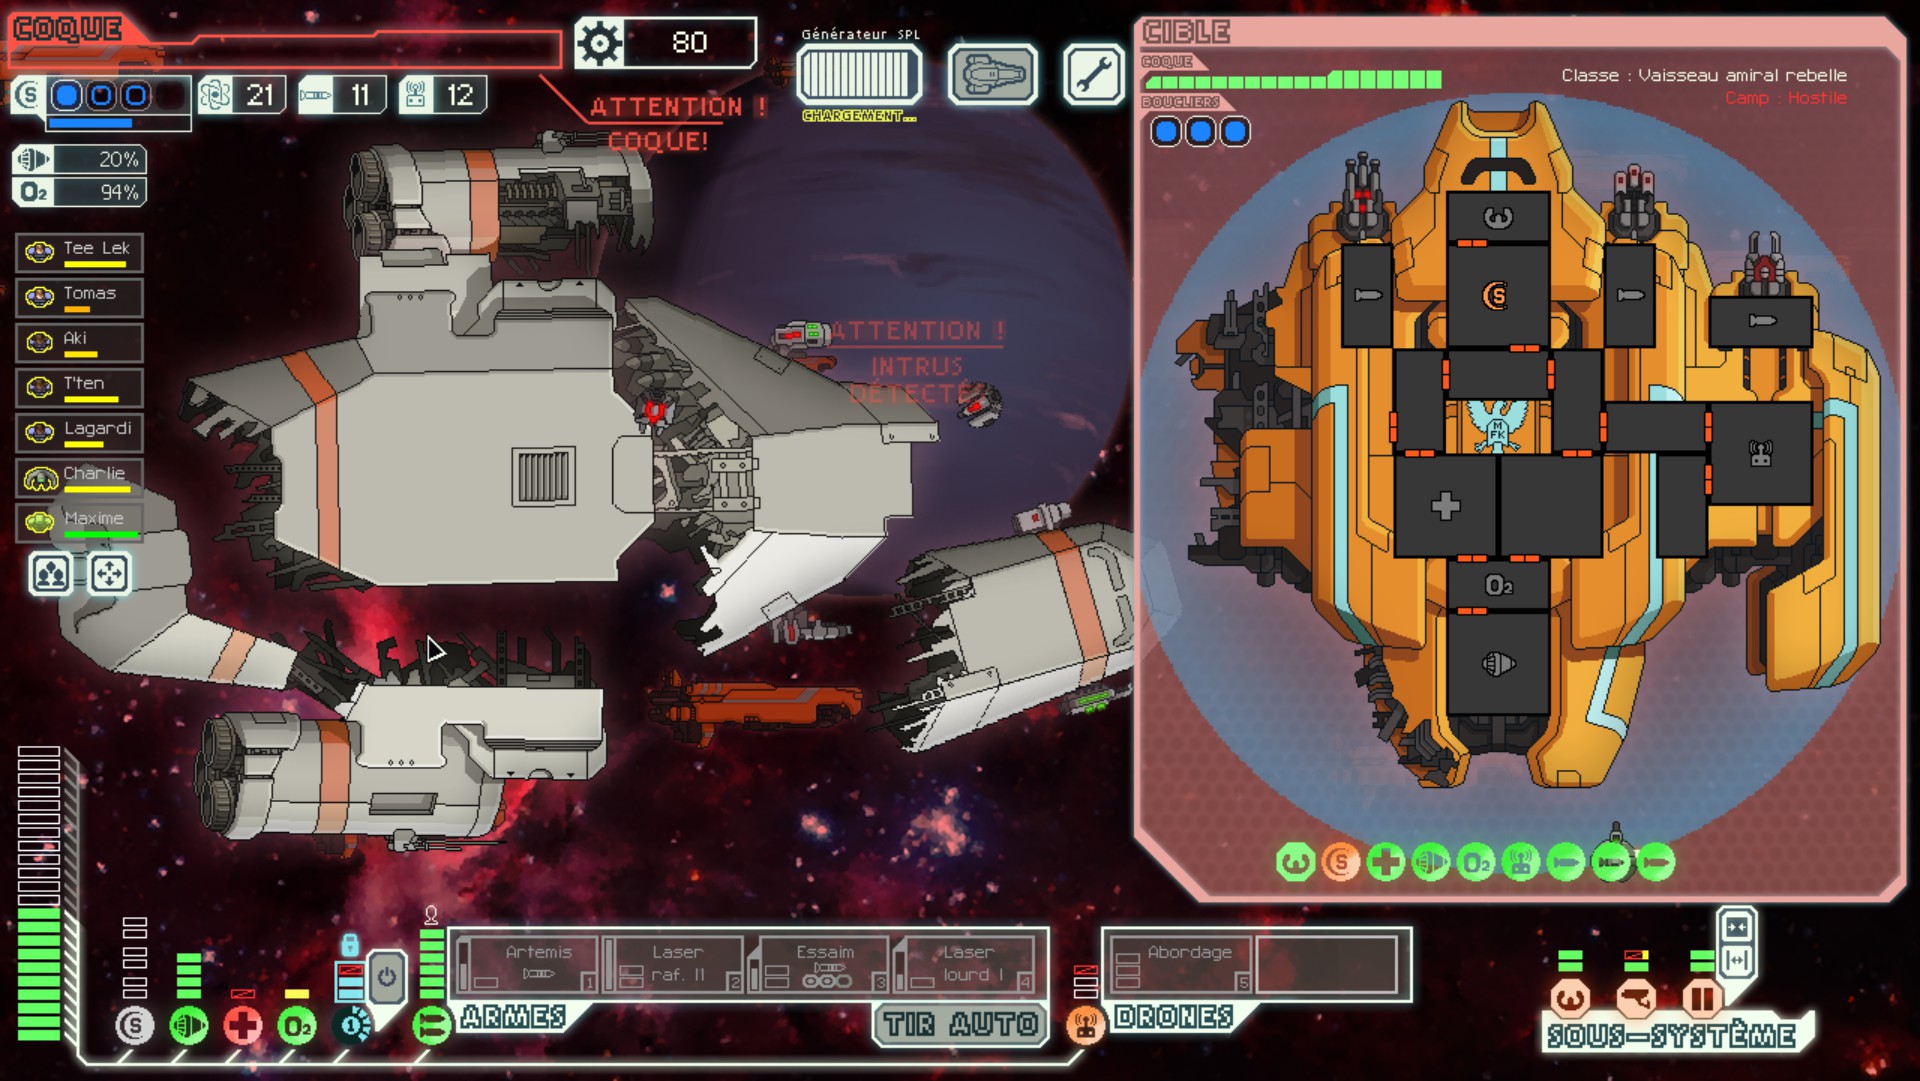 The Spaceshipper 🚀 on Twitter: "FTL: Faster Than Light was released 10 years ago today! I can't stop play this game. I'm sure I'll still be playing it on September